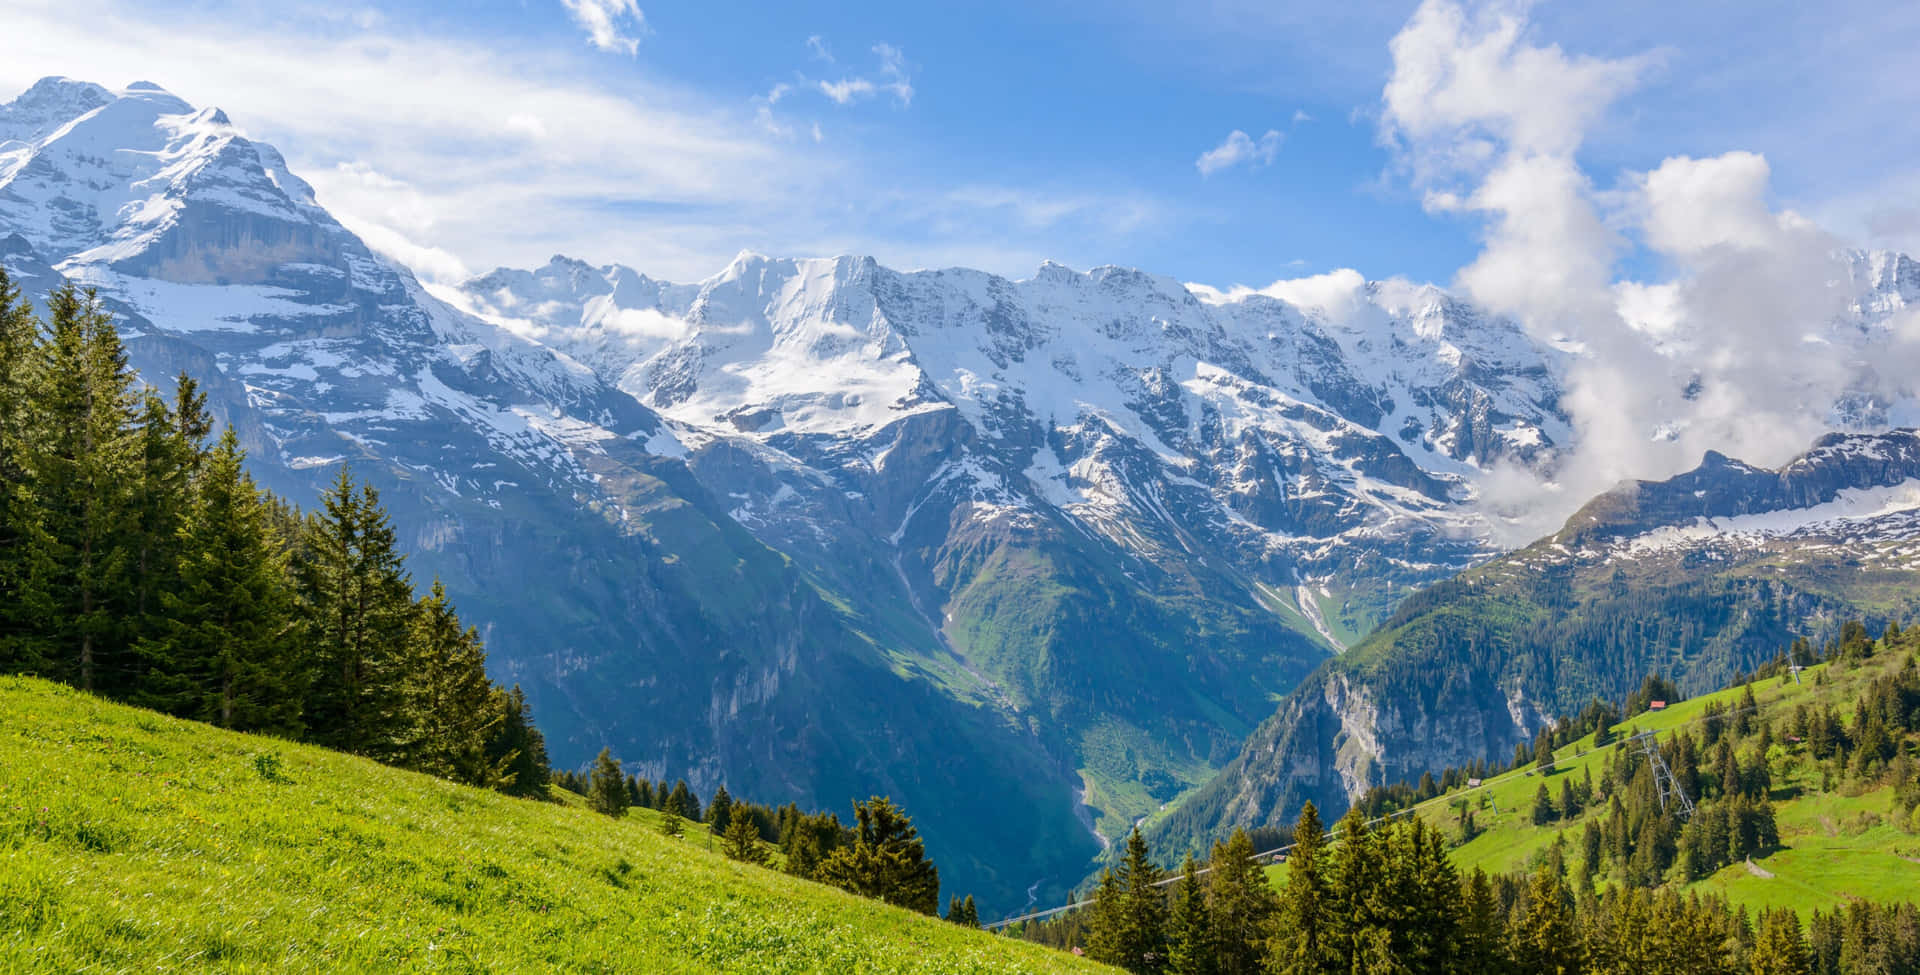 "Discover the excellence of the Swiss Alps"